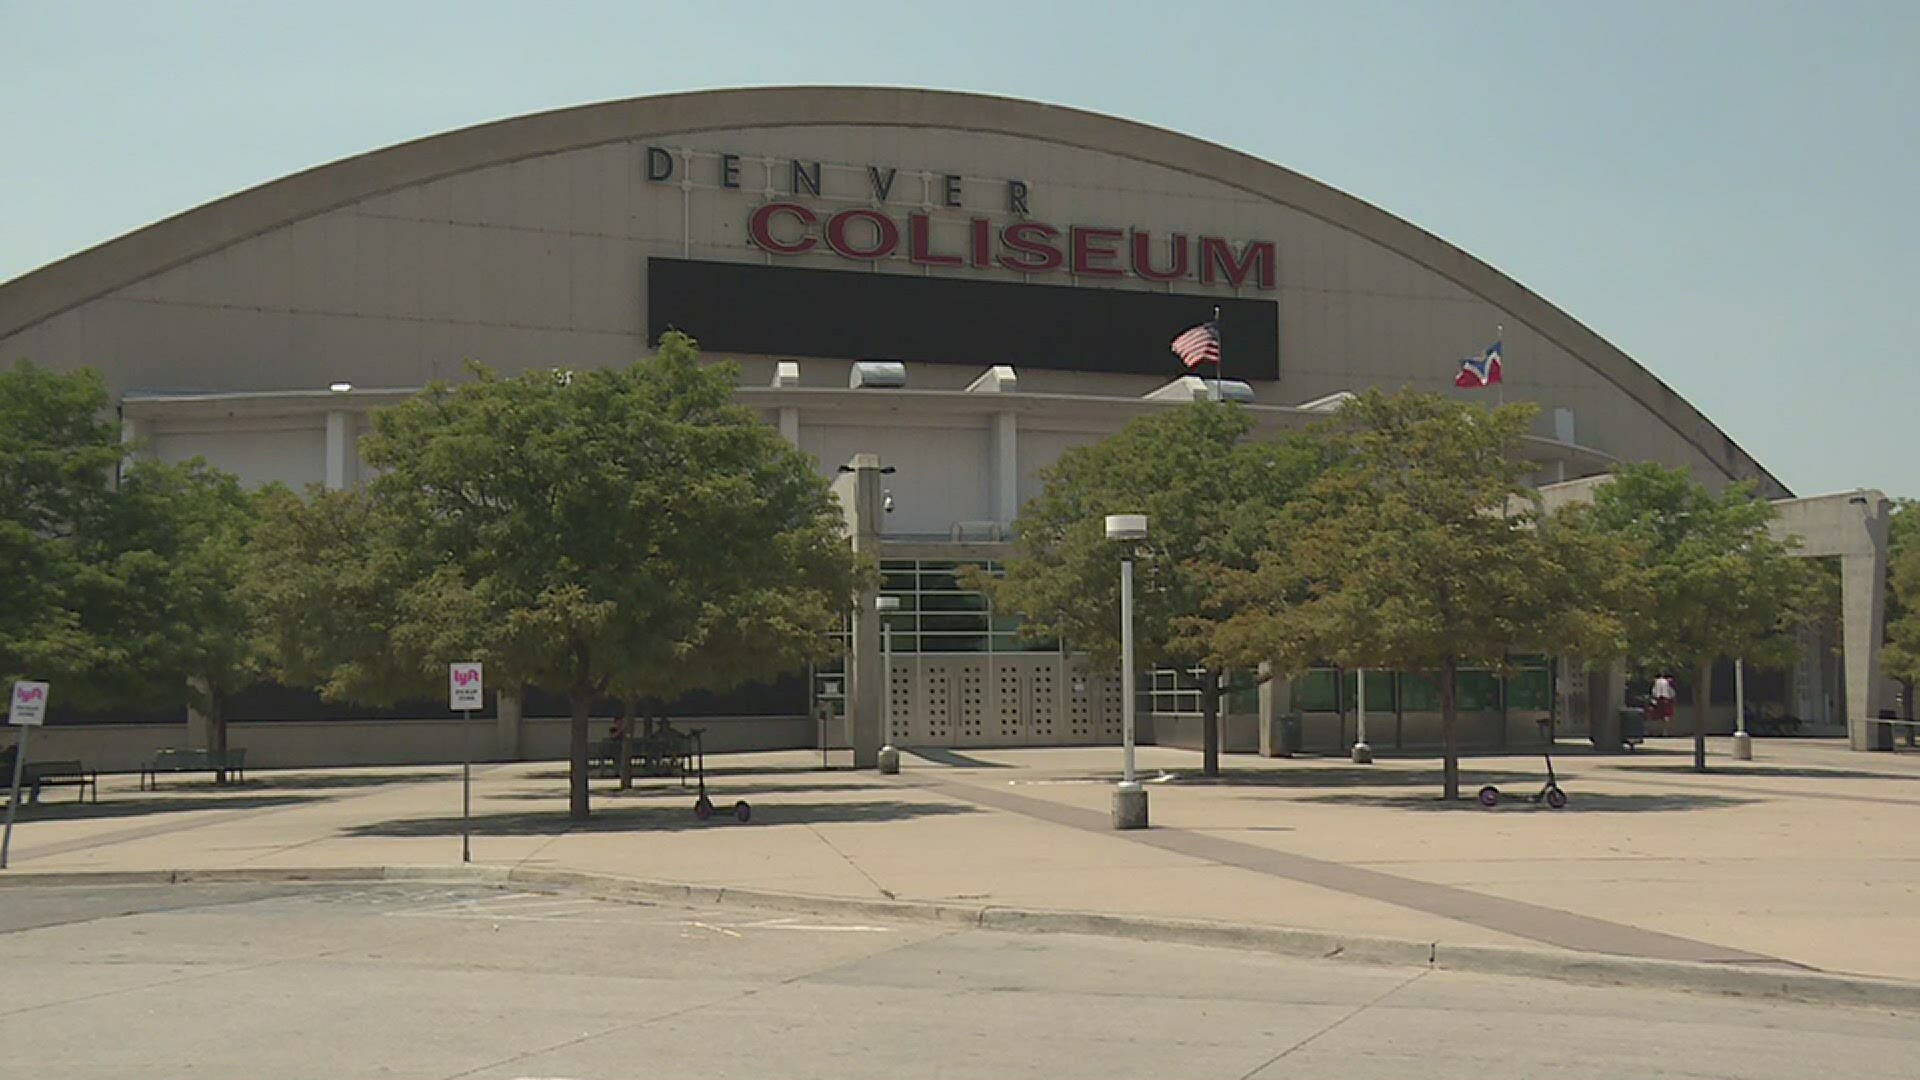 Denver Mayor Michael Hancock hopes voters will OK the arena at the National Western Center campus, where another arena, Denver Coliseum, has stood since 1951.